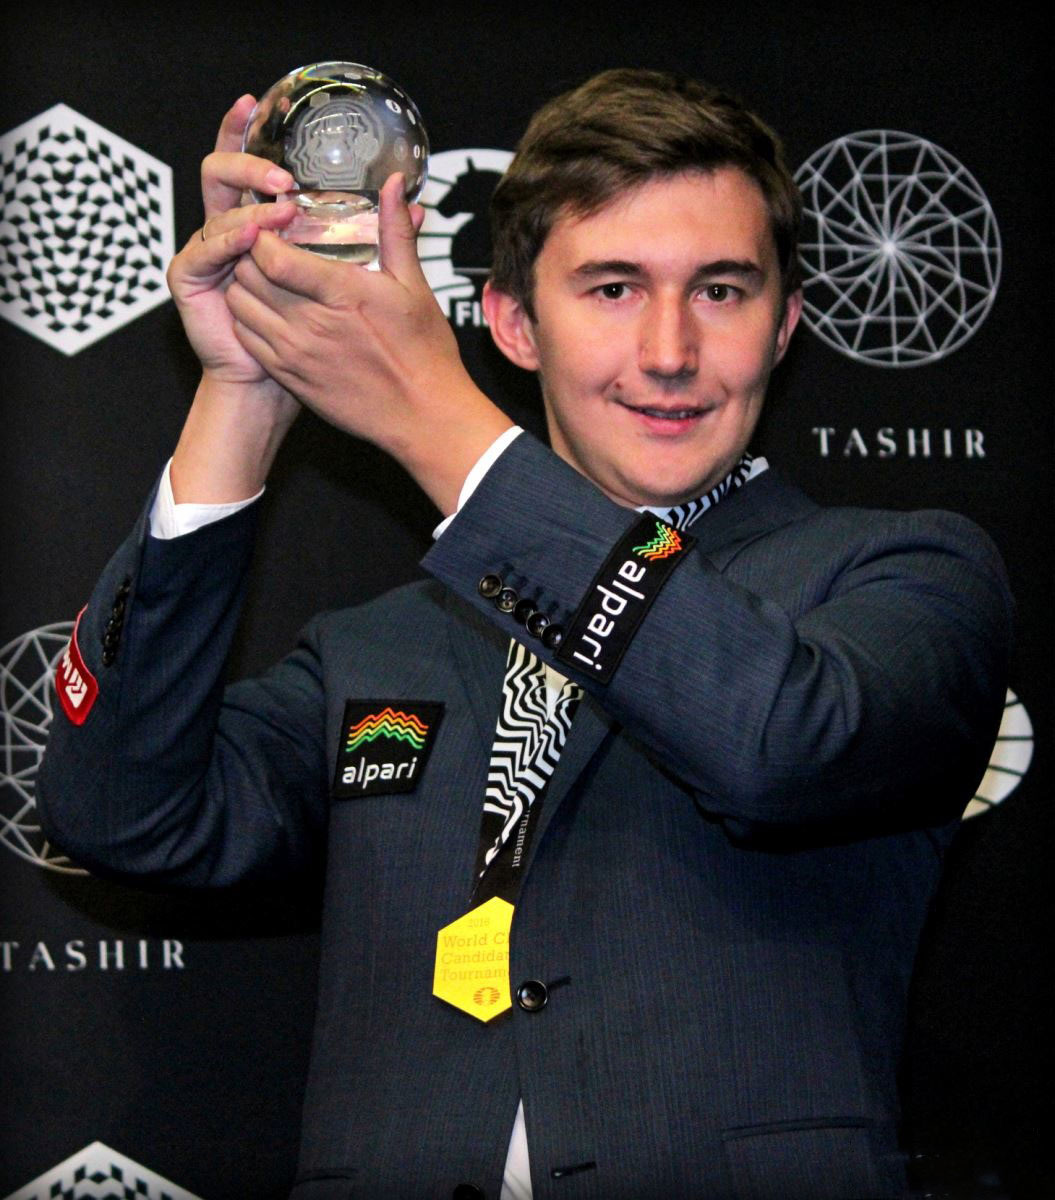 Karjakin Wins Candidates' Tournament, Qualifies For World Title Match 